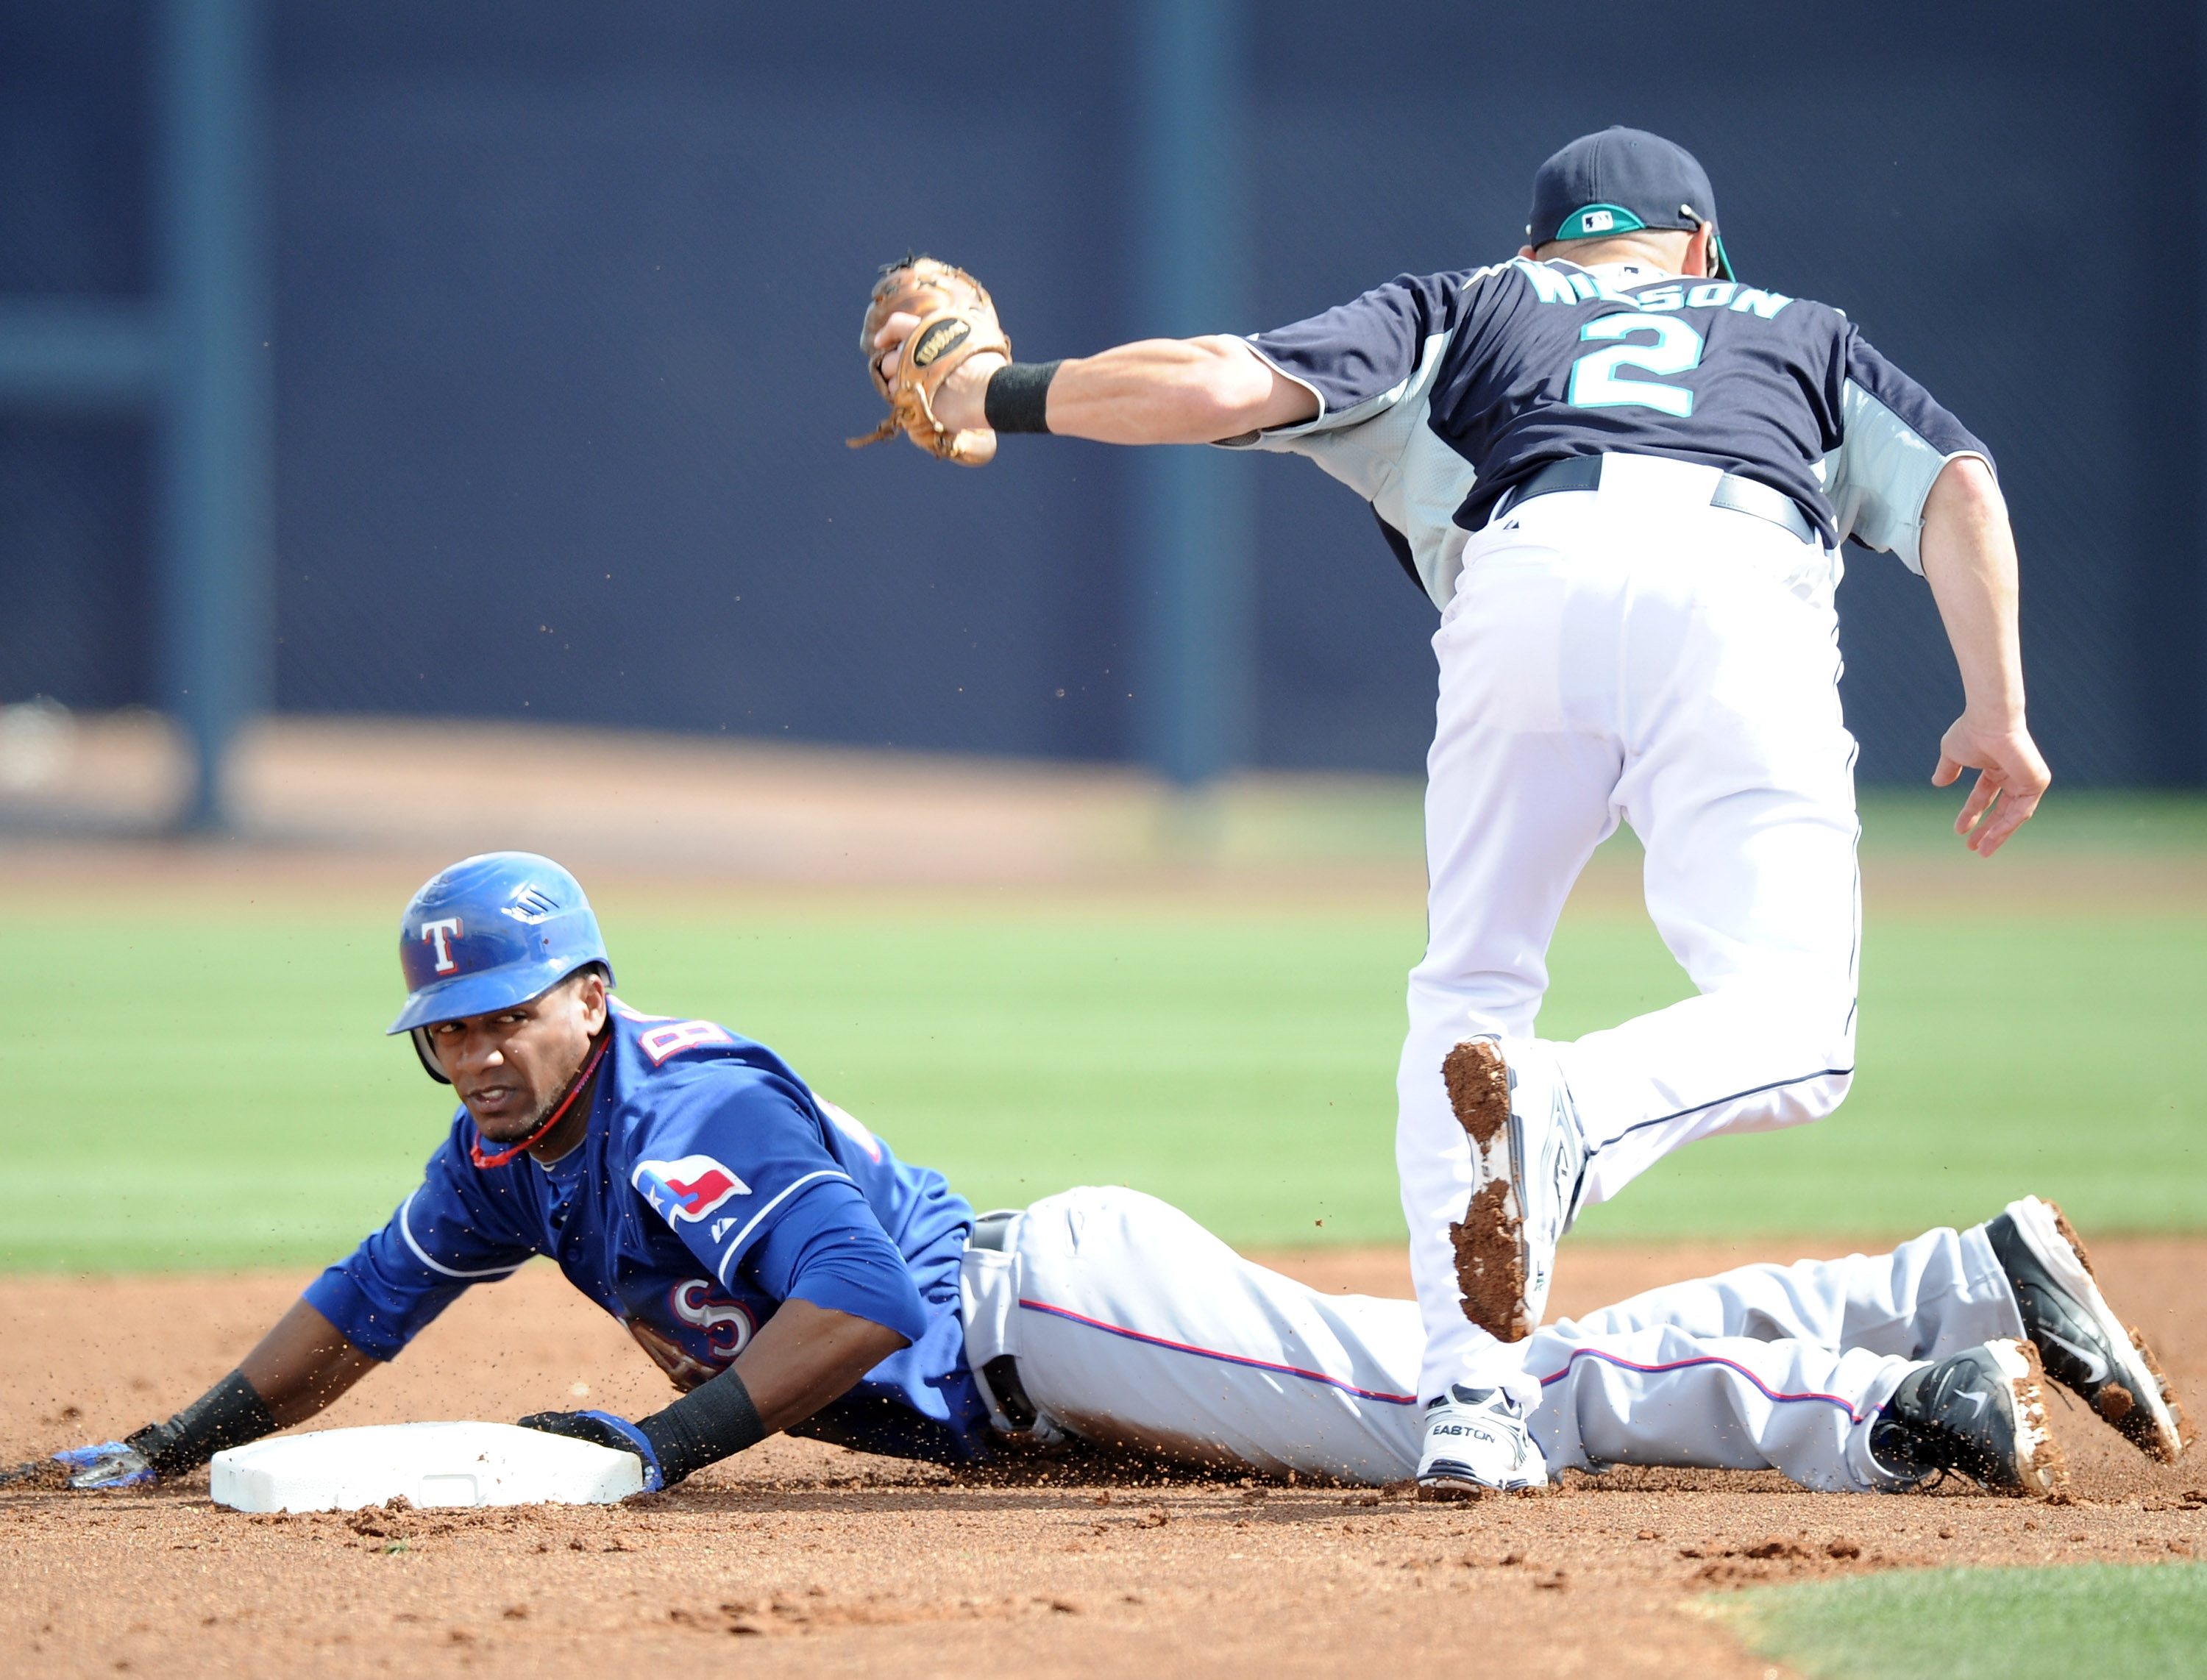 PEORIA, AZ - MARCH 01:  Julio Borbon #20 of the Texas Rangers is caught stealing by Jack Wilson #20 of the Seattle Mariners in the first inning during spring training at Peoria Stadium on March 1, 2011 in Peoria, Arizona.  (Photo by Harry How/Getty Images